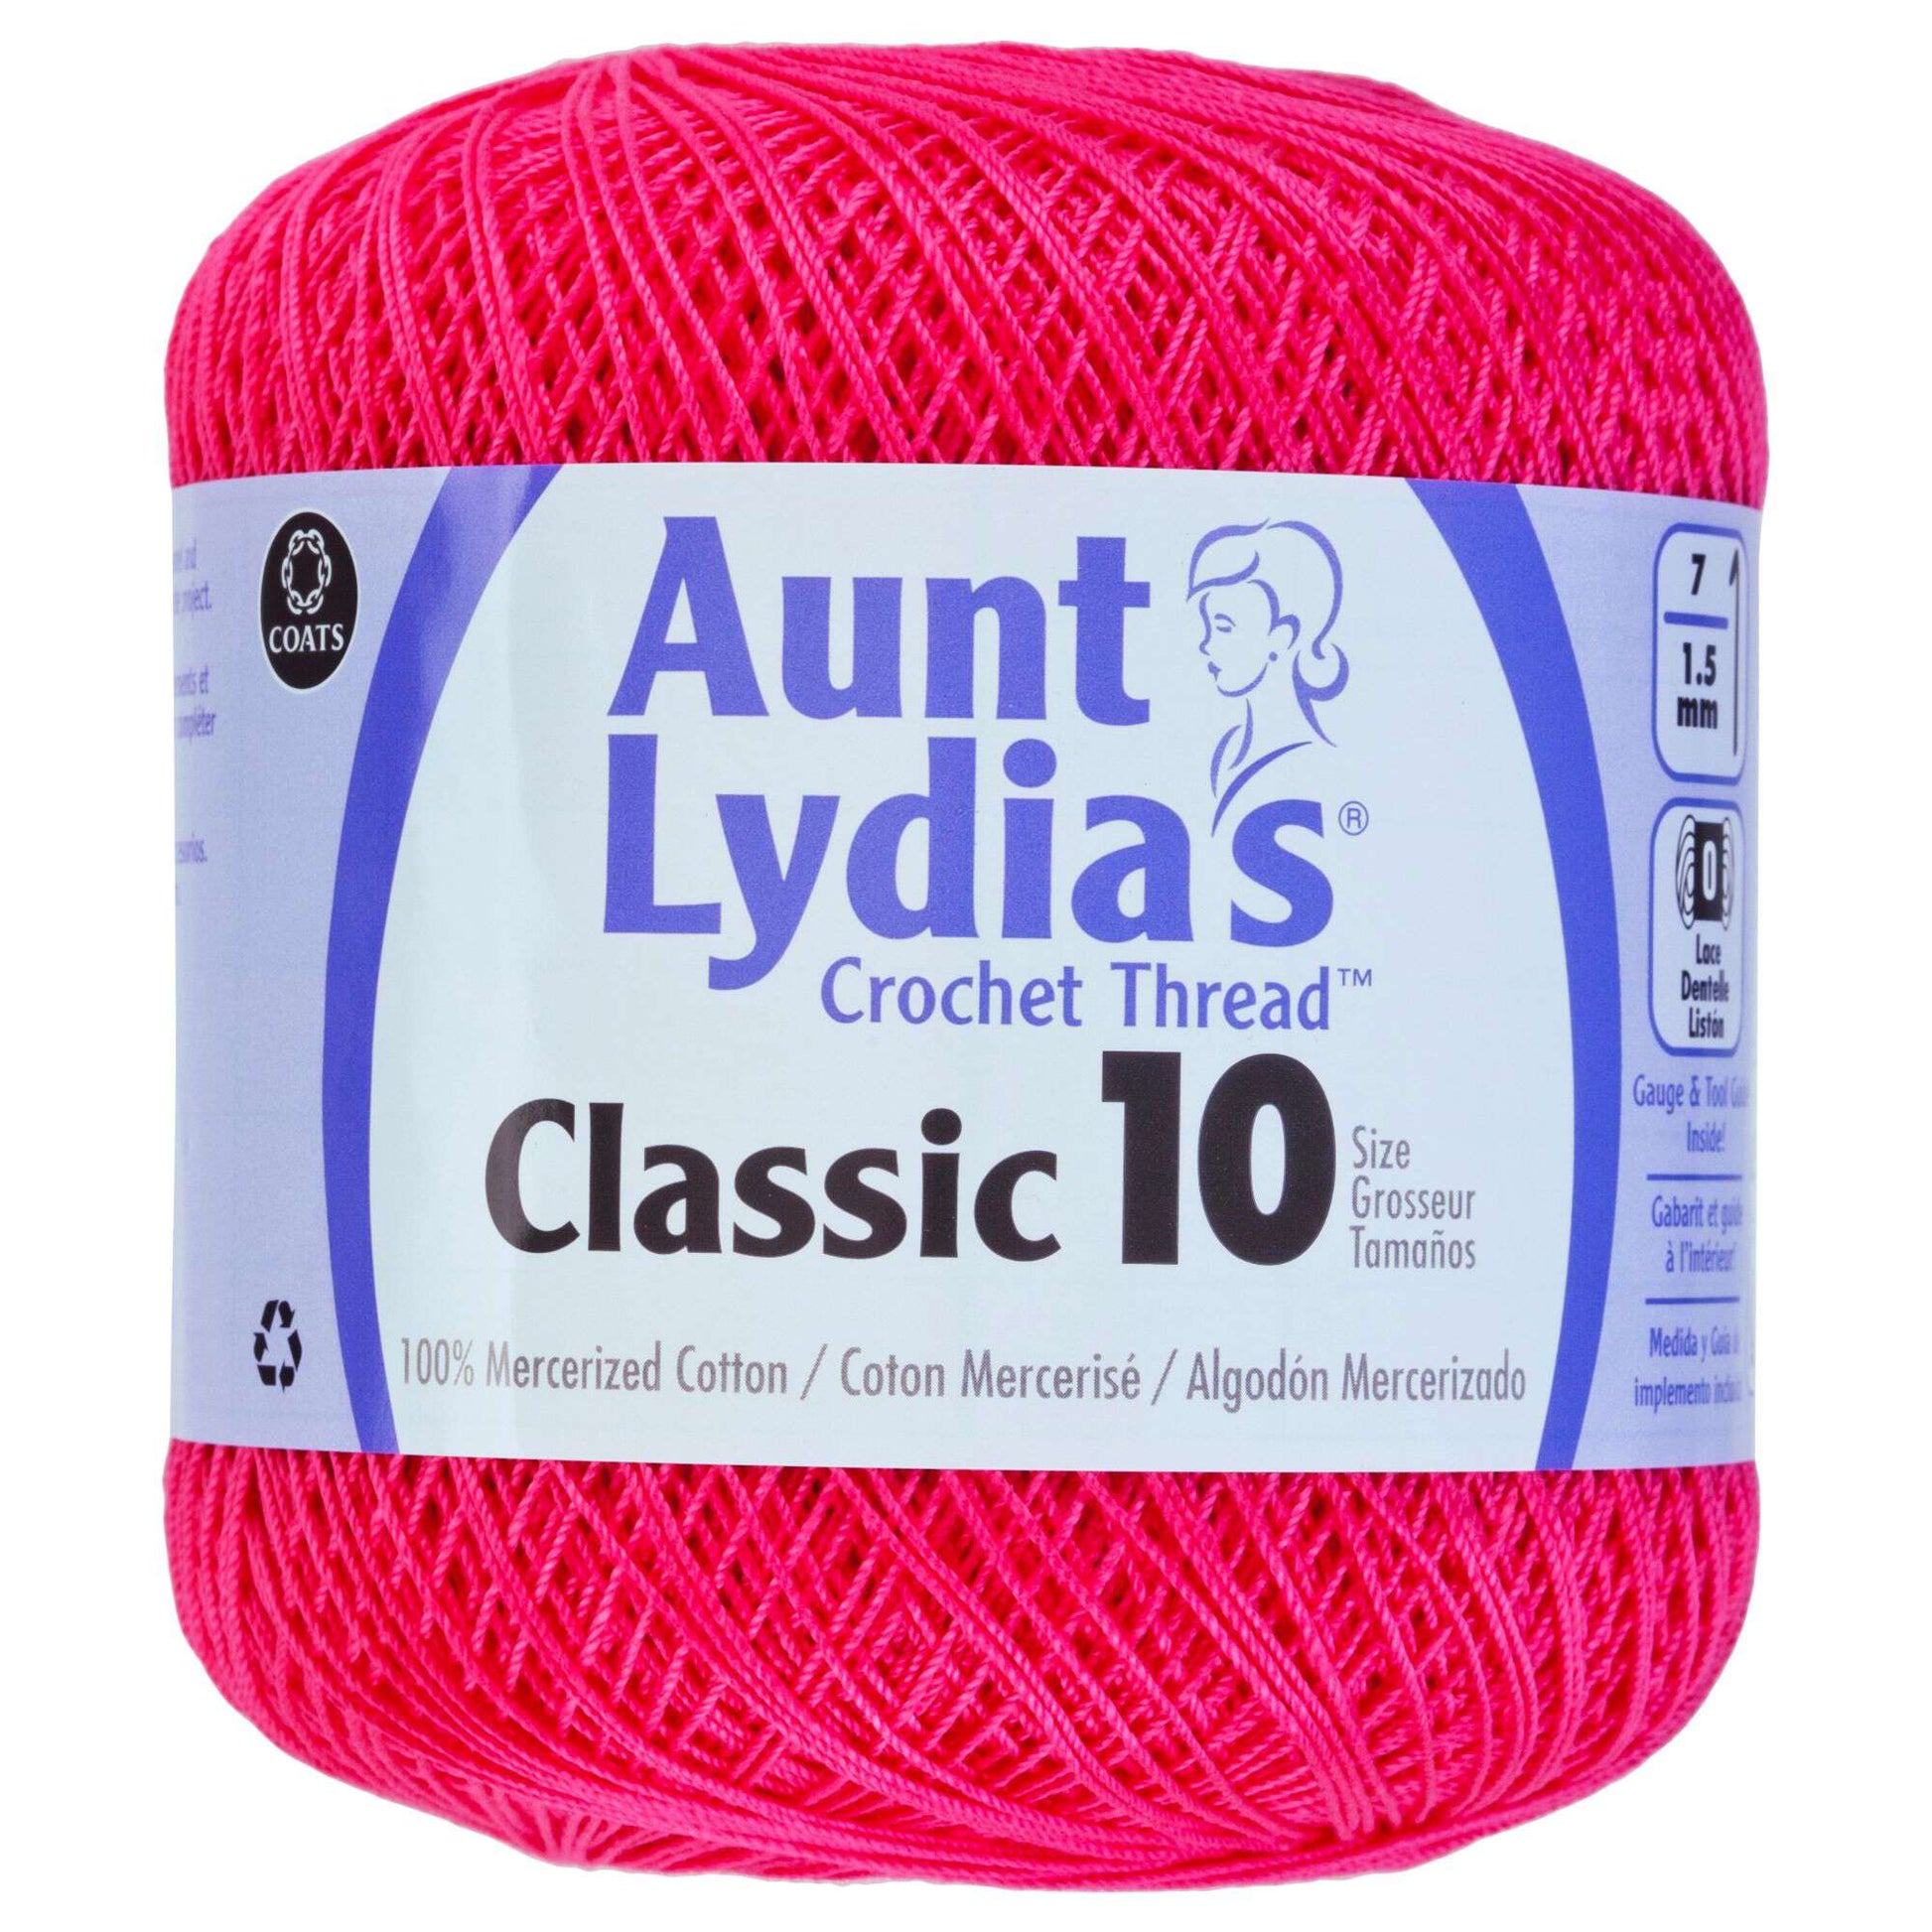 Aunt Lydia's Classic Crochet Thread Size 10 - Clearance shades Hot Pink